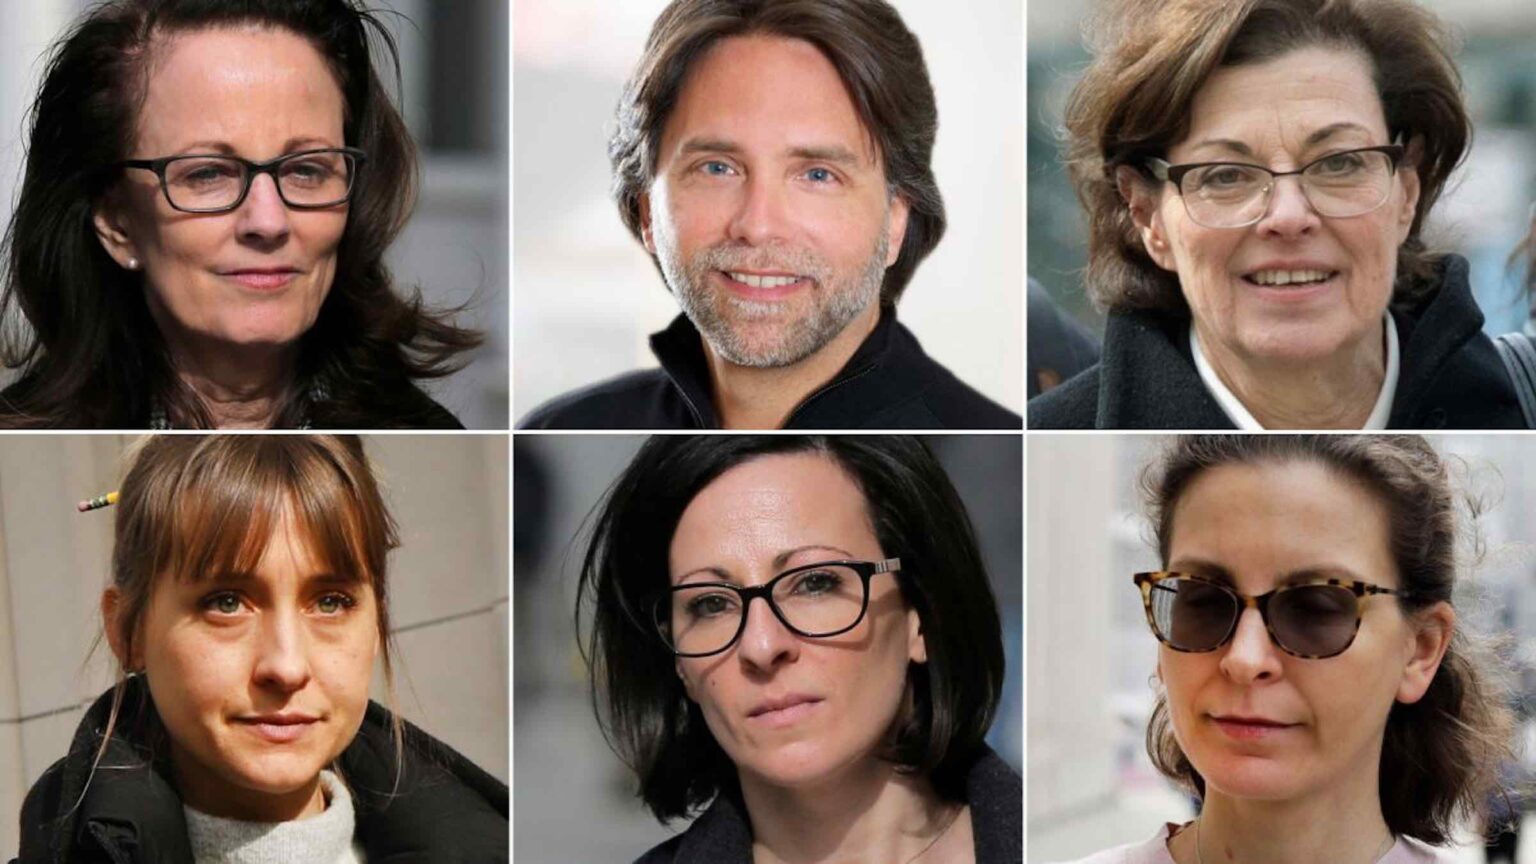 The ringleaders for the NXIVM cult have already been tried and convicted. How long could the leaders be sentenced to jail for?